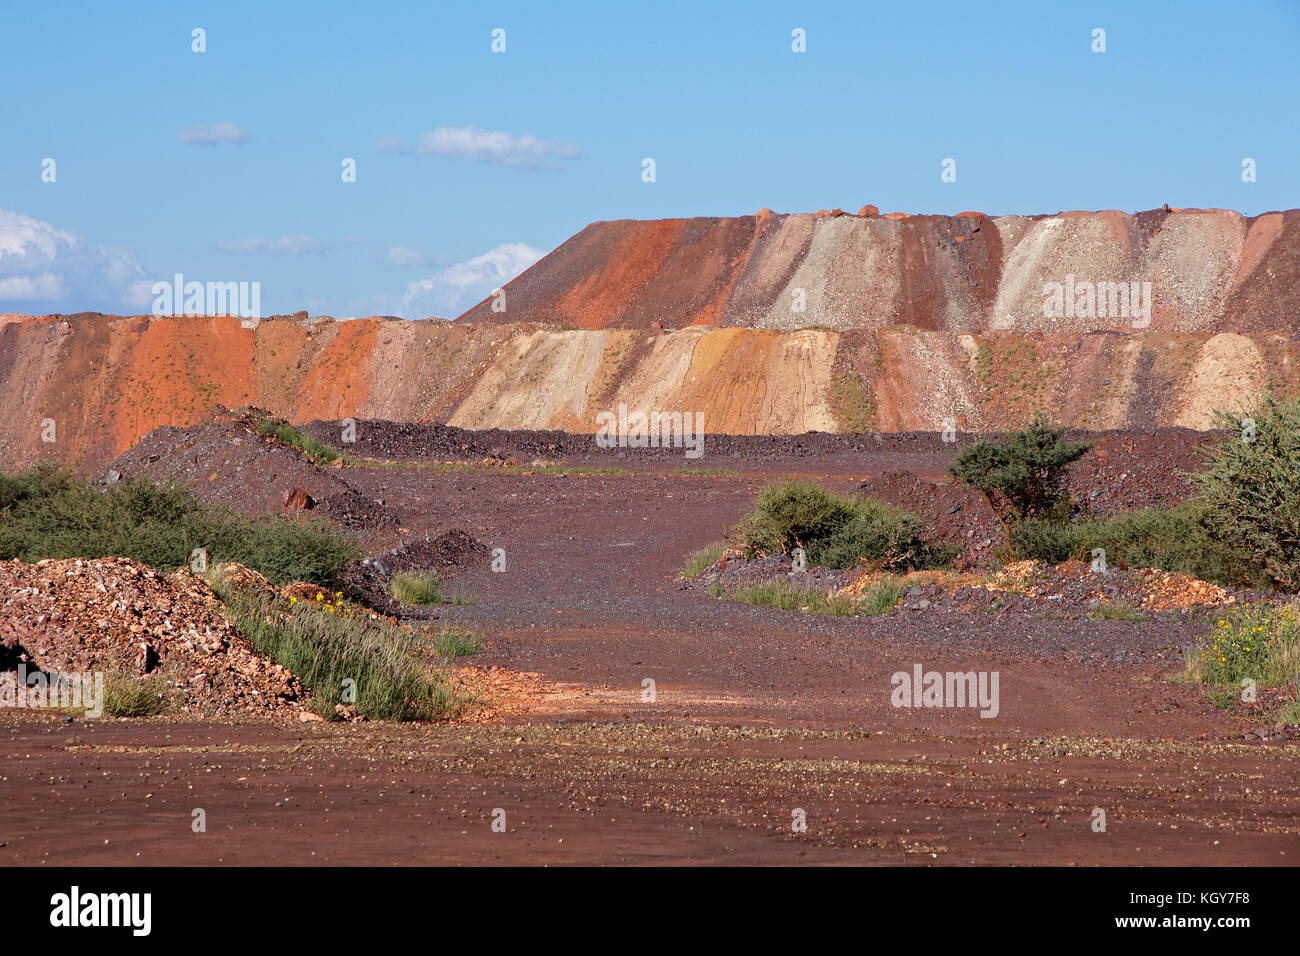 Mining dump with colorful layers of soil excavated from iron ore mining operations Stock Photo